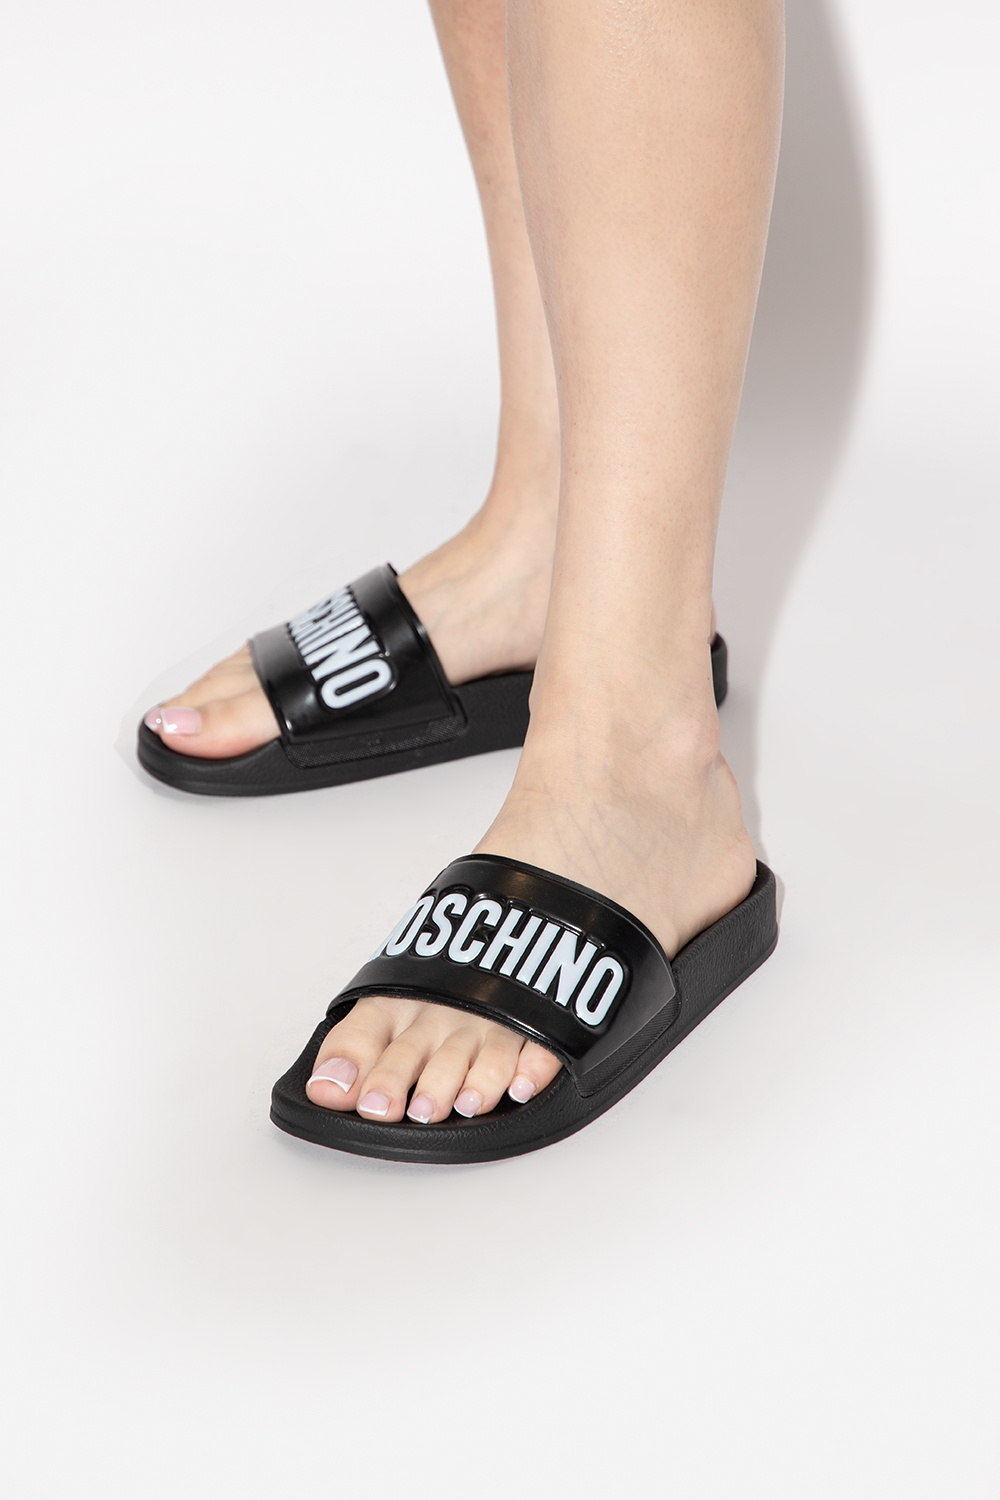 Moschino a casual court-style sneaker